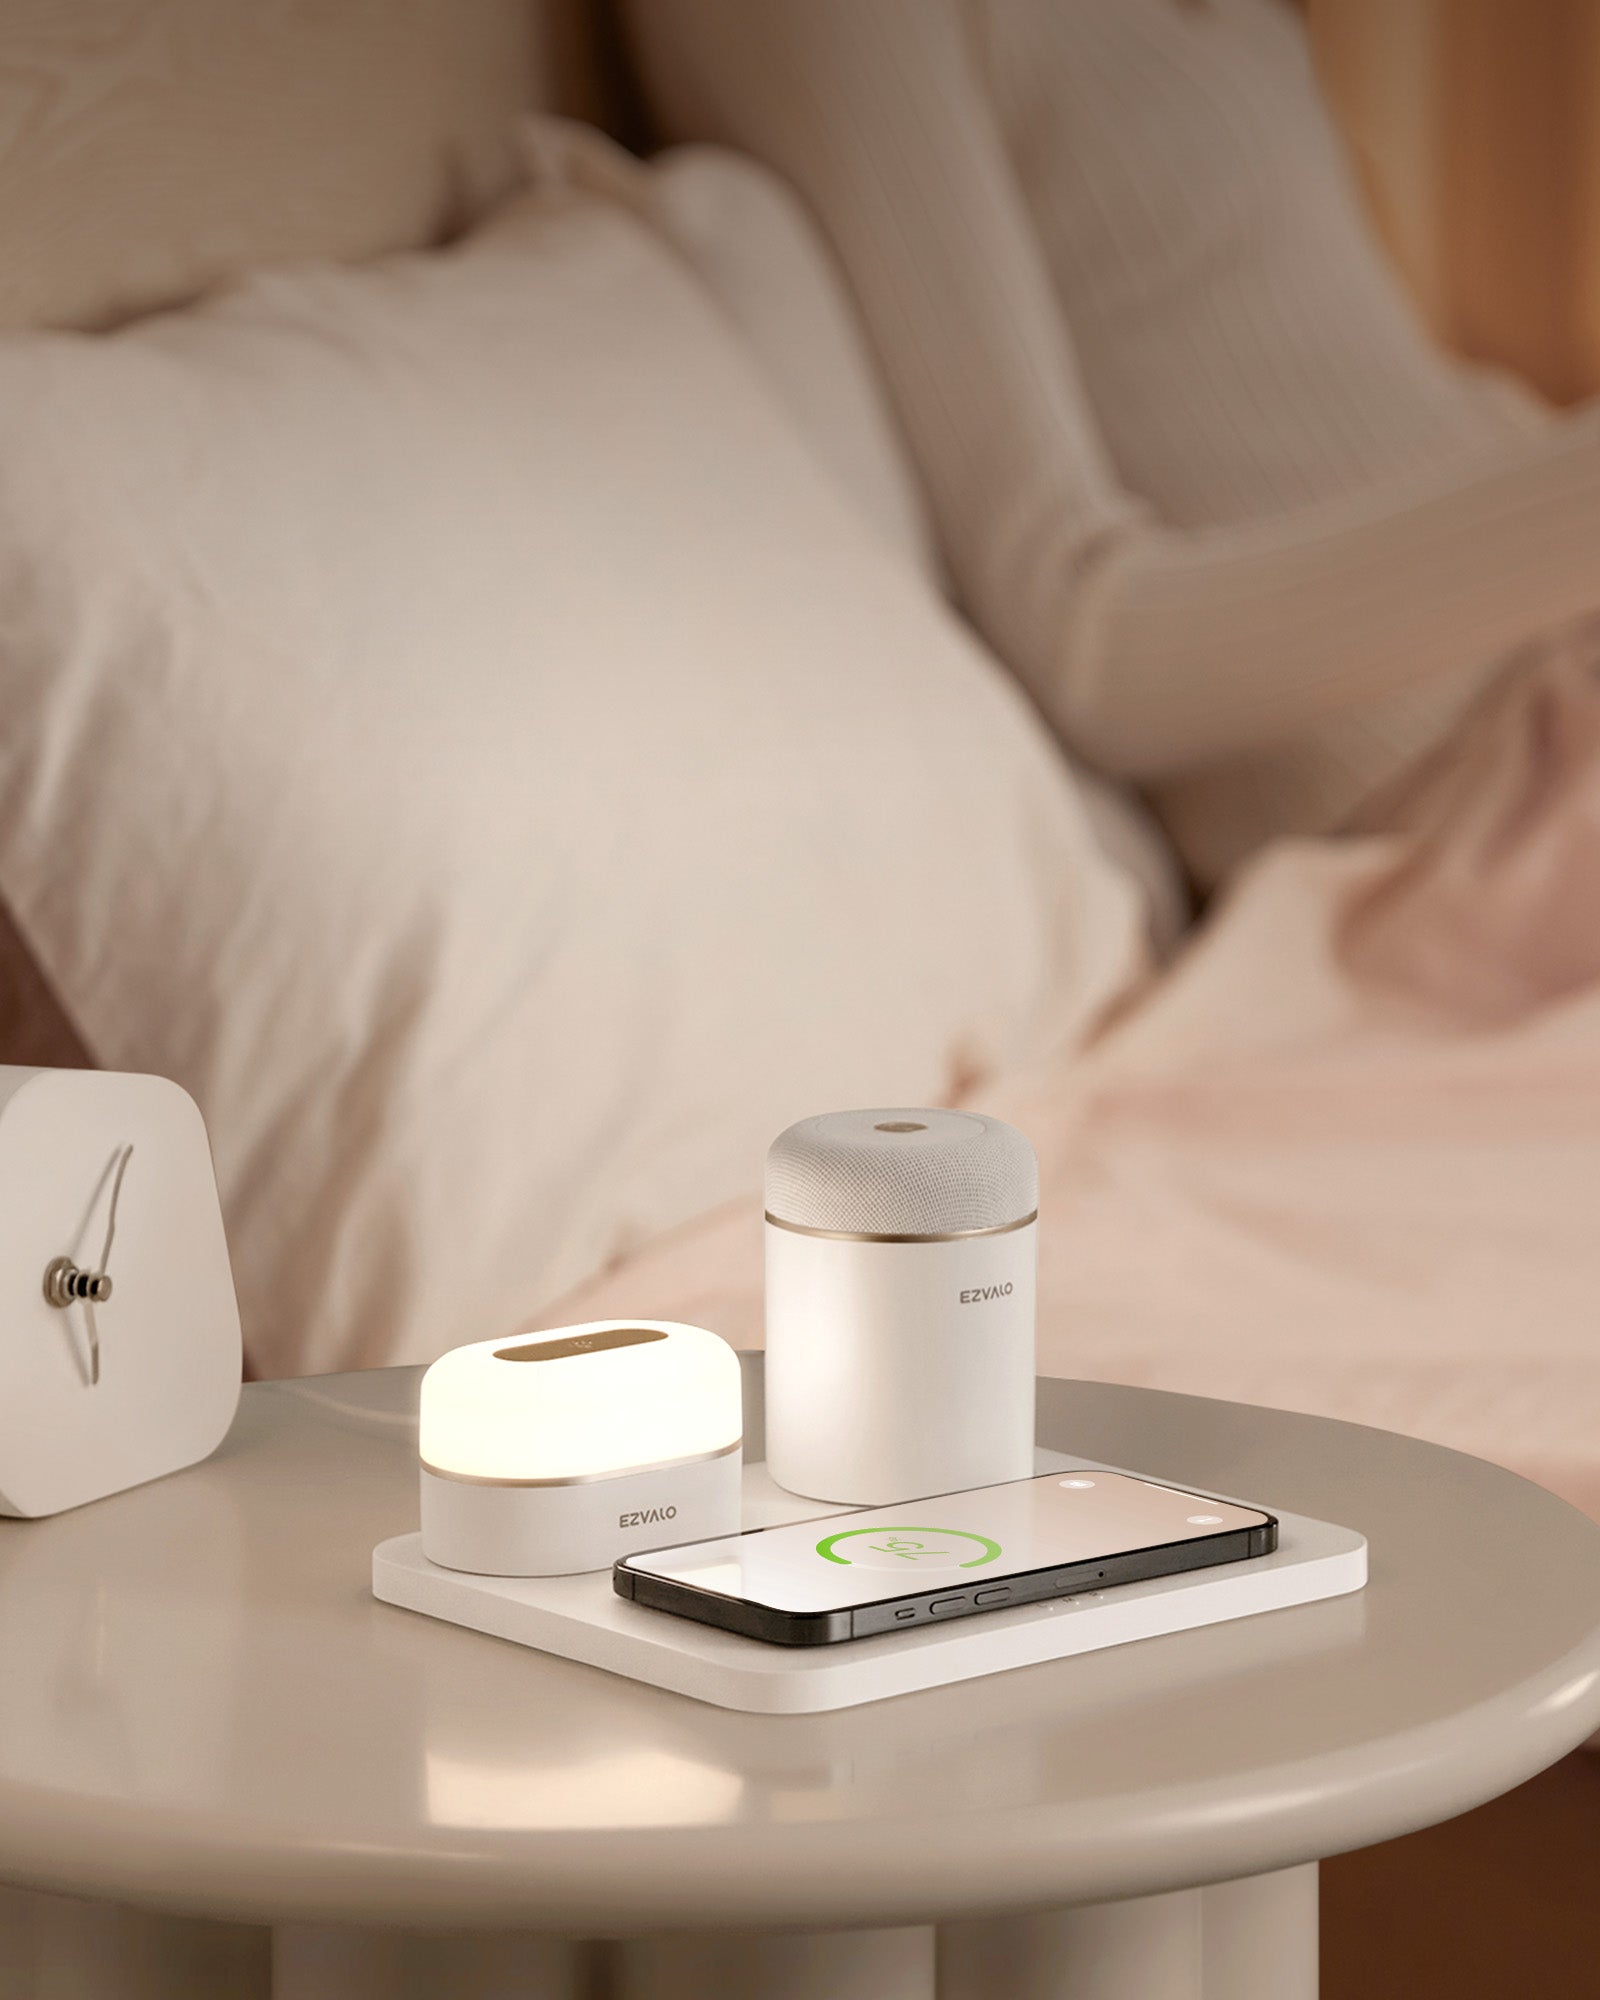 Is Wireless Charging Safe for Bedside?